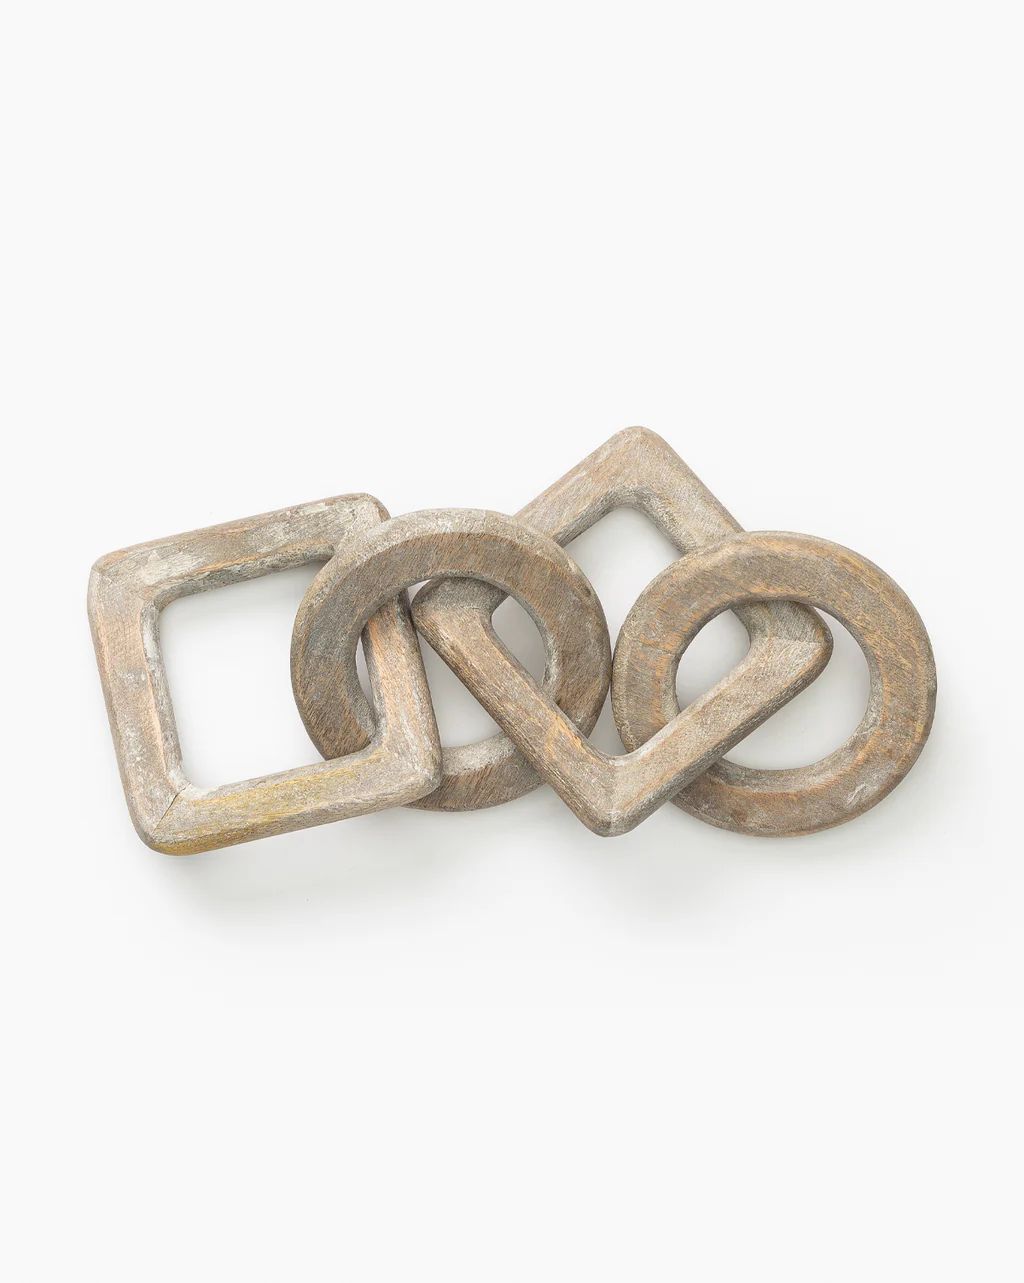 Round & Square Wooden Links | McGee & Co.